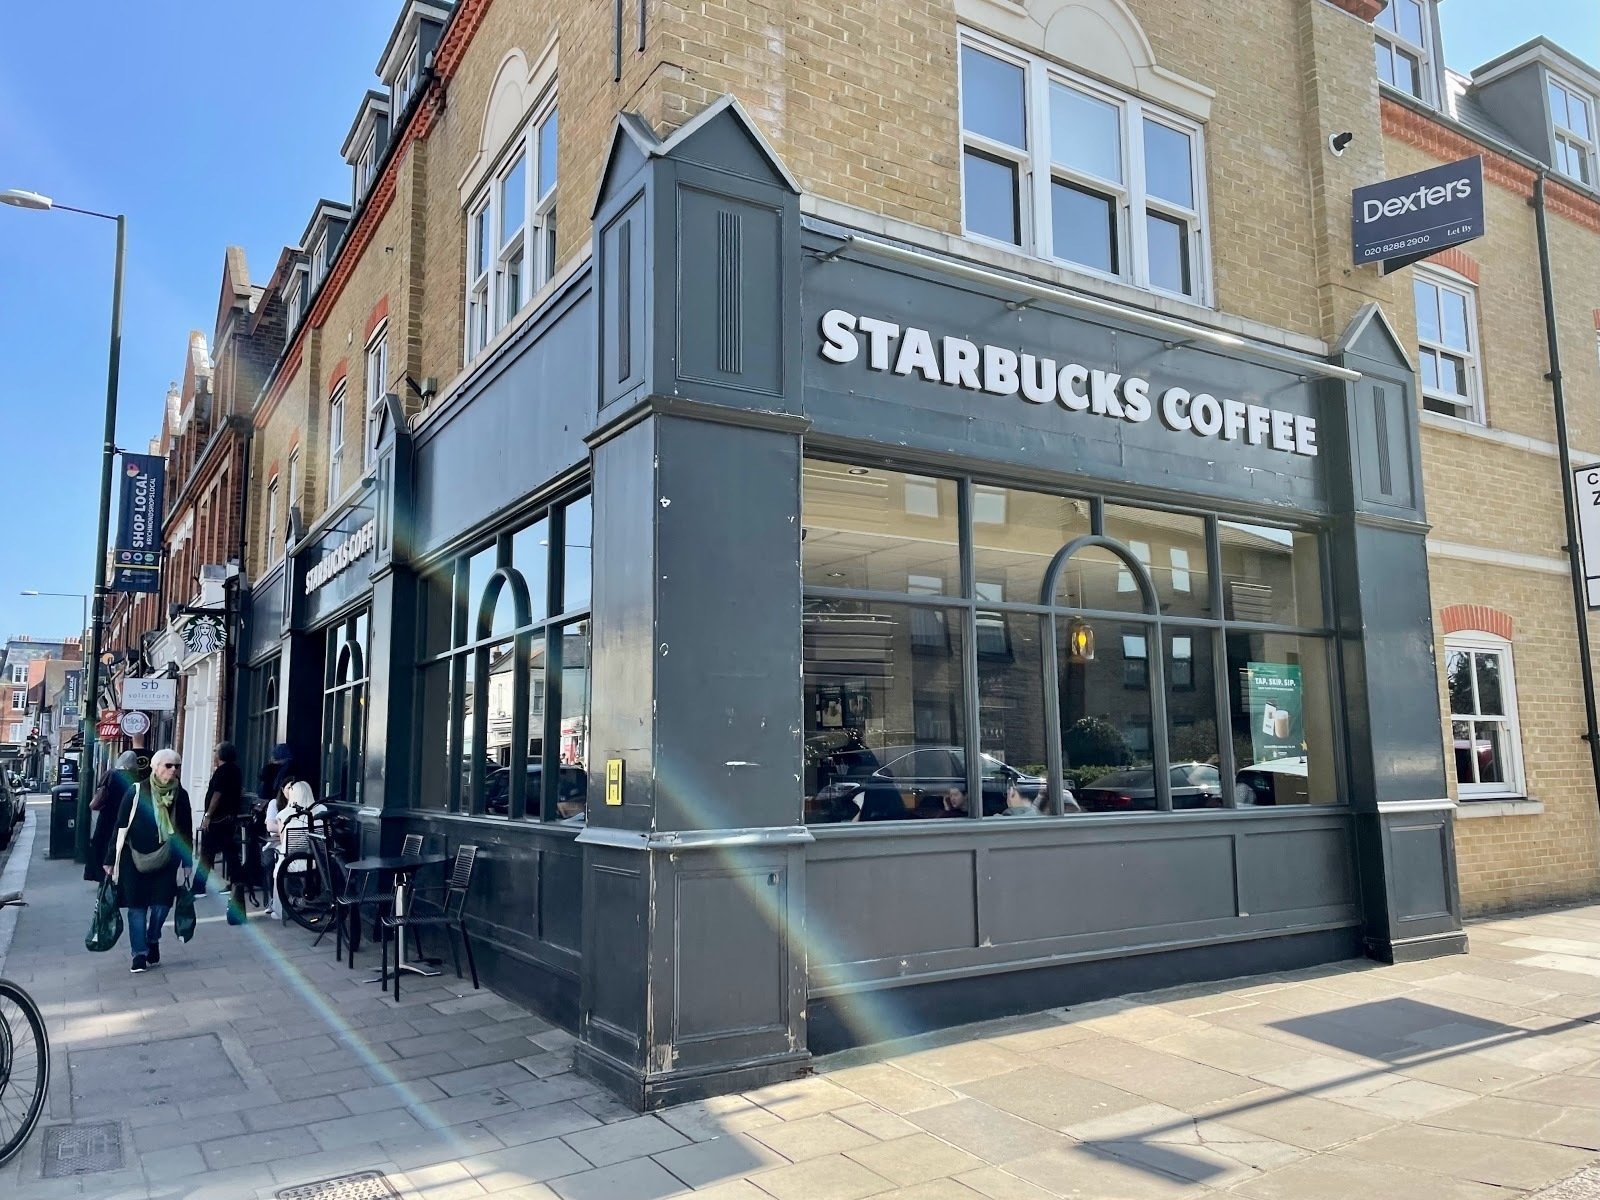 <span class="translation_missing" title="translation missing: en.meta.location_title, location_name: Starbucks Coffee @ 70 High Street, city: London">Location Title</span>